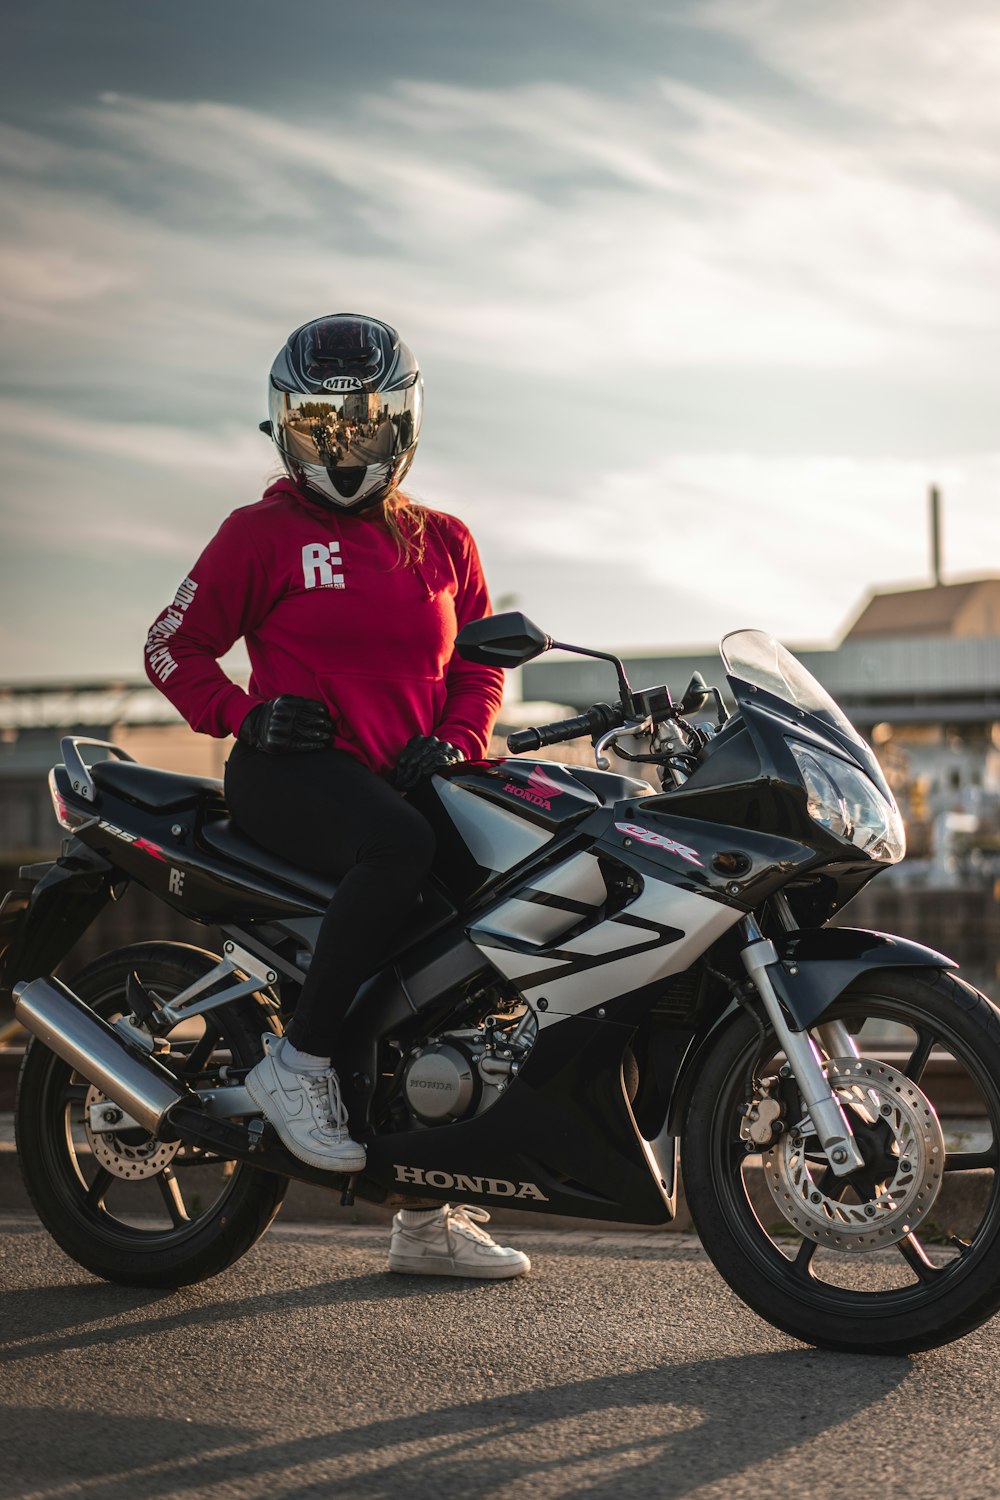 person sitting on Honda sports bike during day